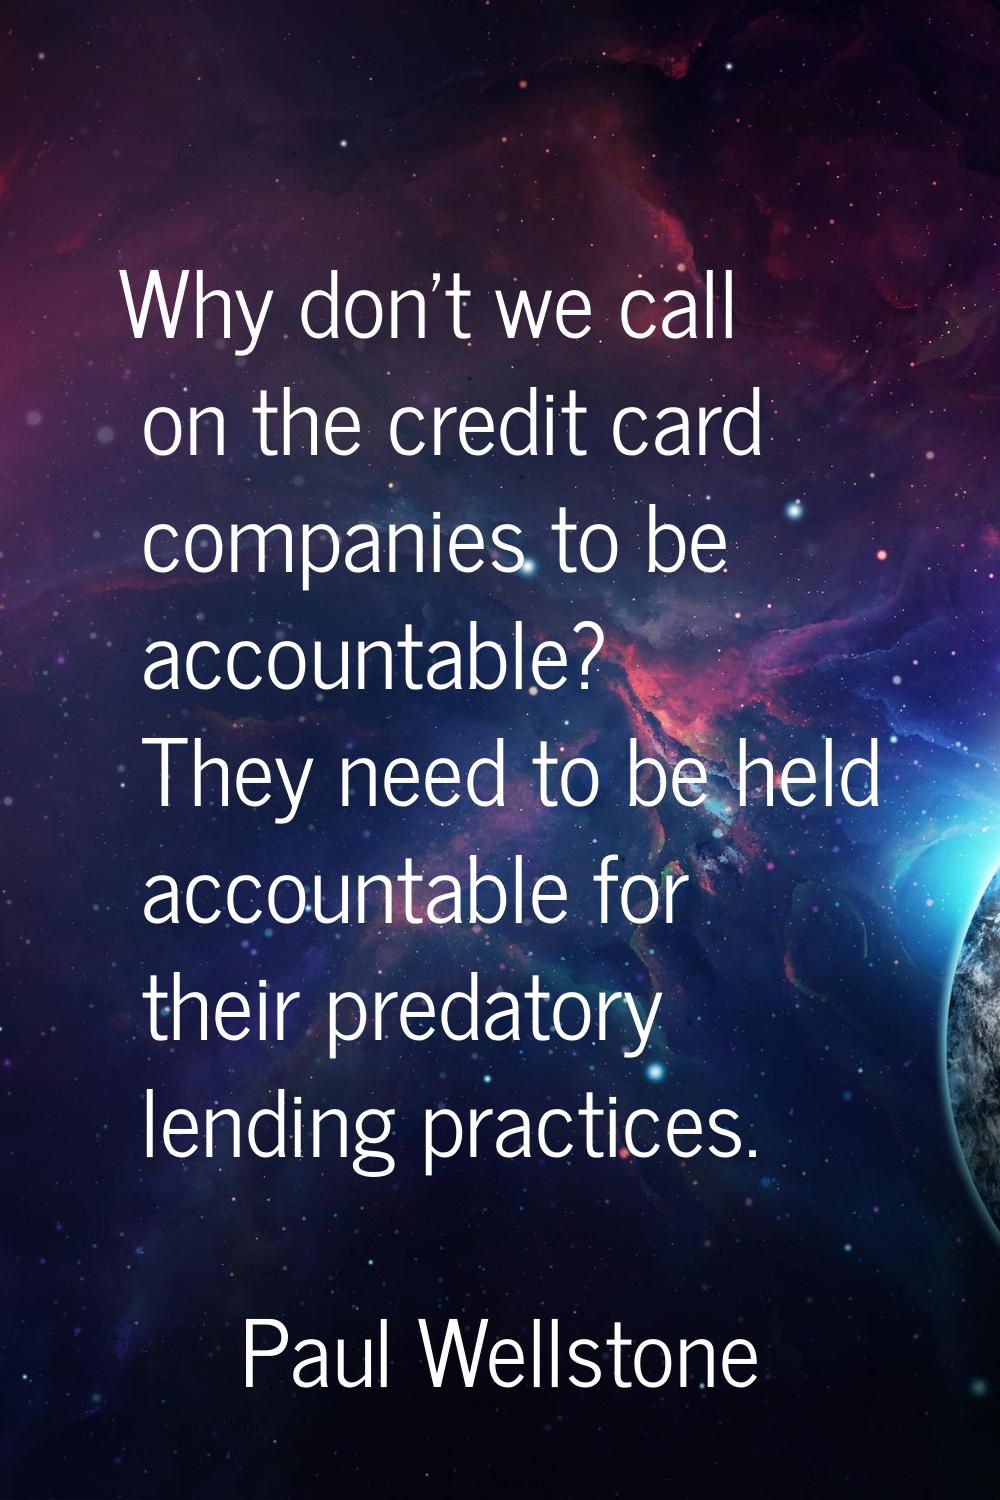 Why don't we call on the credit card companies to be accountable? They need to be held accountable 